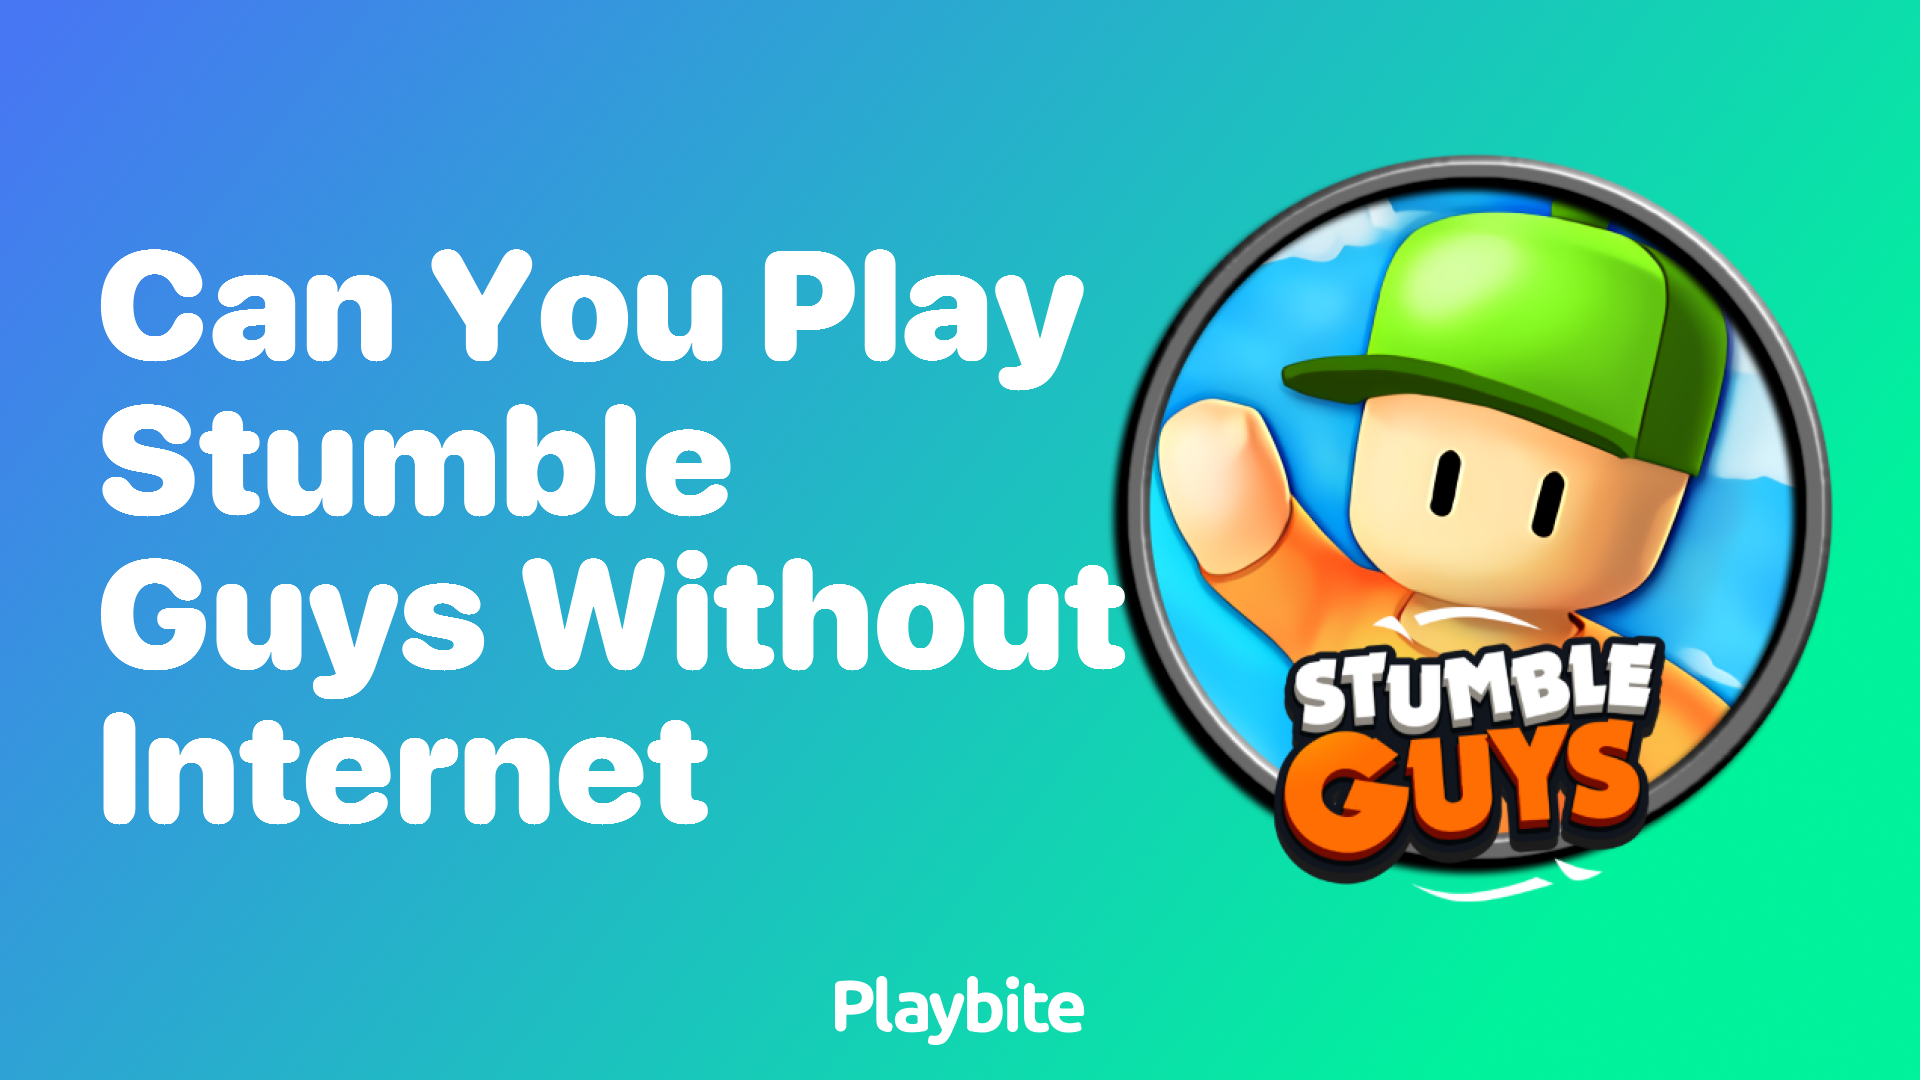 Can You Play Stumble Guys Without Internet?